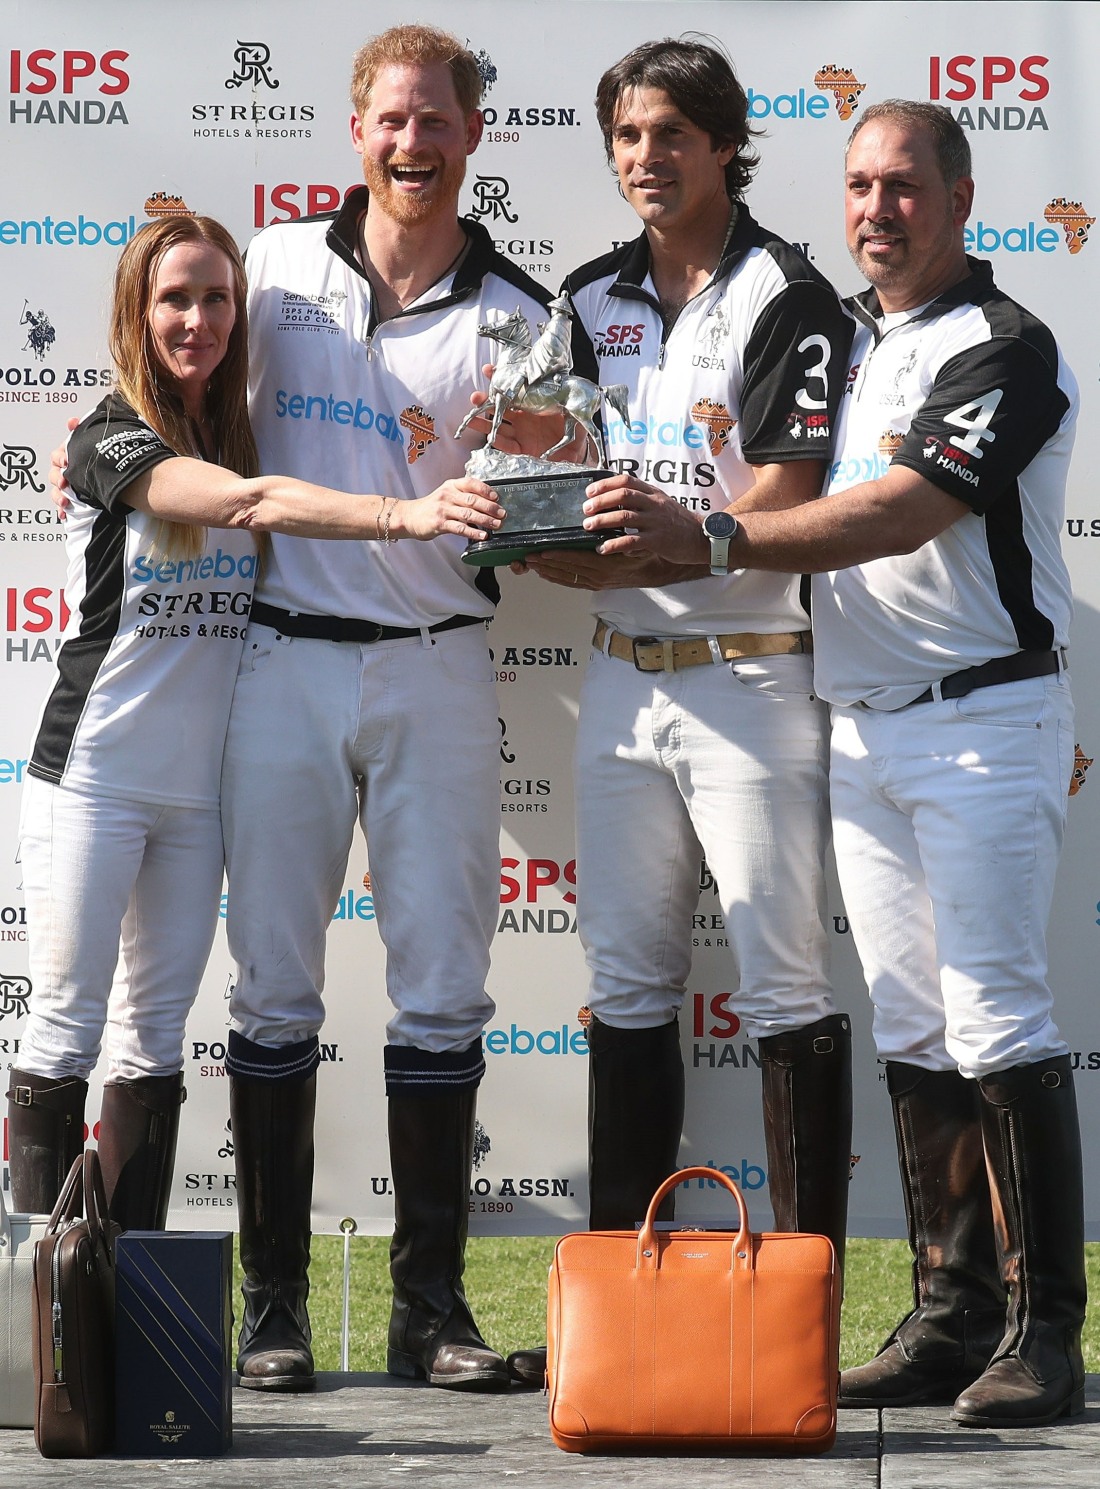 Prince Harry travelled to Rome to attend the 2019 Sentebale ISPS Handa Polo Cup